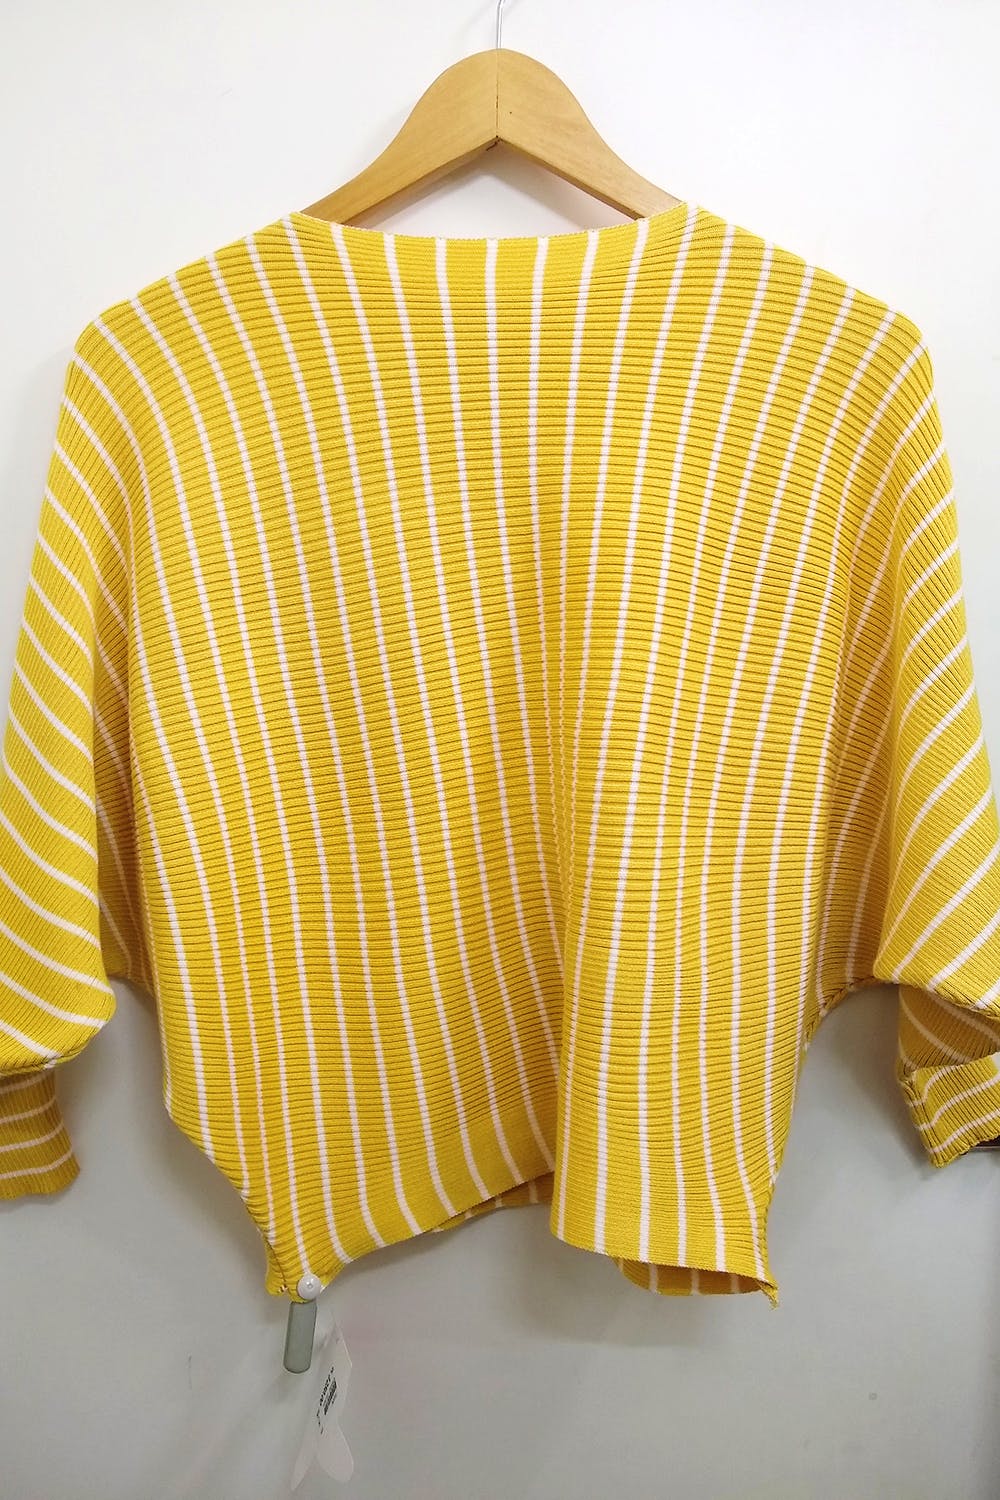 Clothing,Yellow,Outerwear,Sleeve,Sweater,Clothes hanger,Cardigan,Top,Beige,Collar